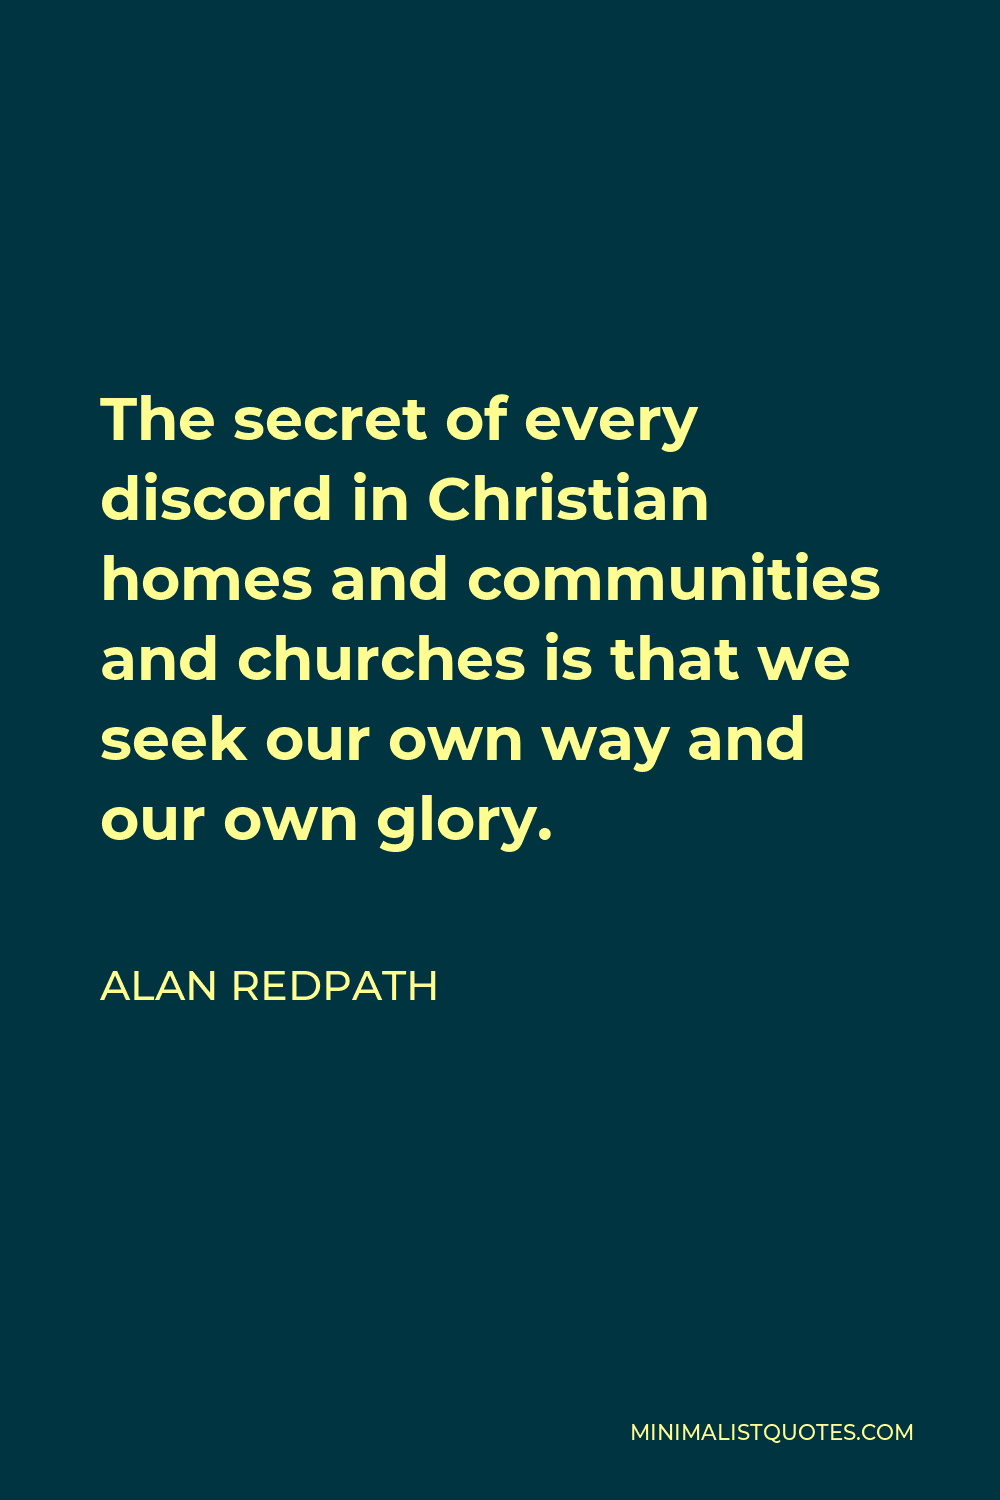 Alan Redpath Quote - The secret of every discord in Christian homes and communities and churches is that we seek our own way and our own glory.